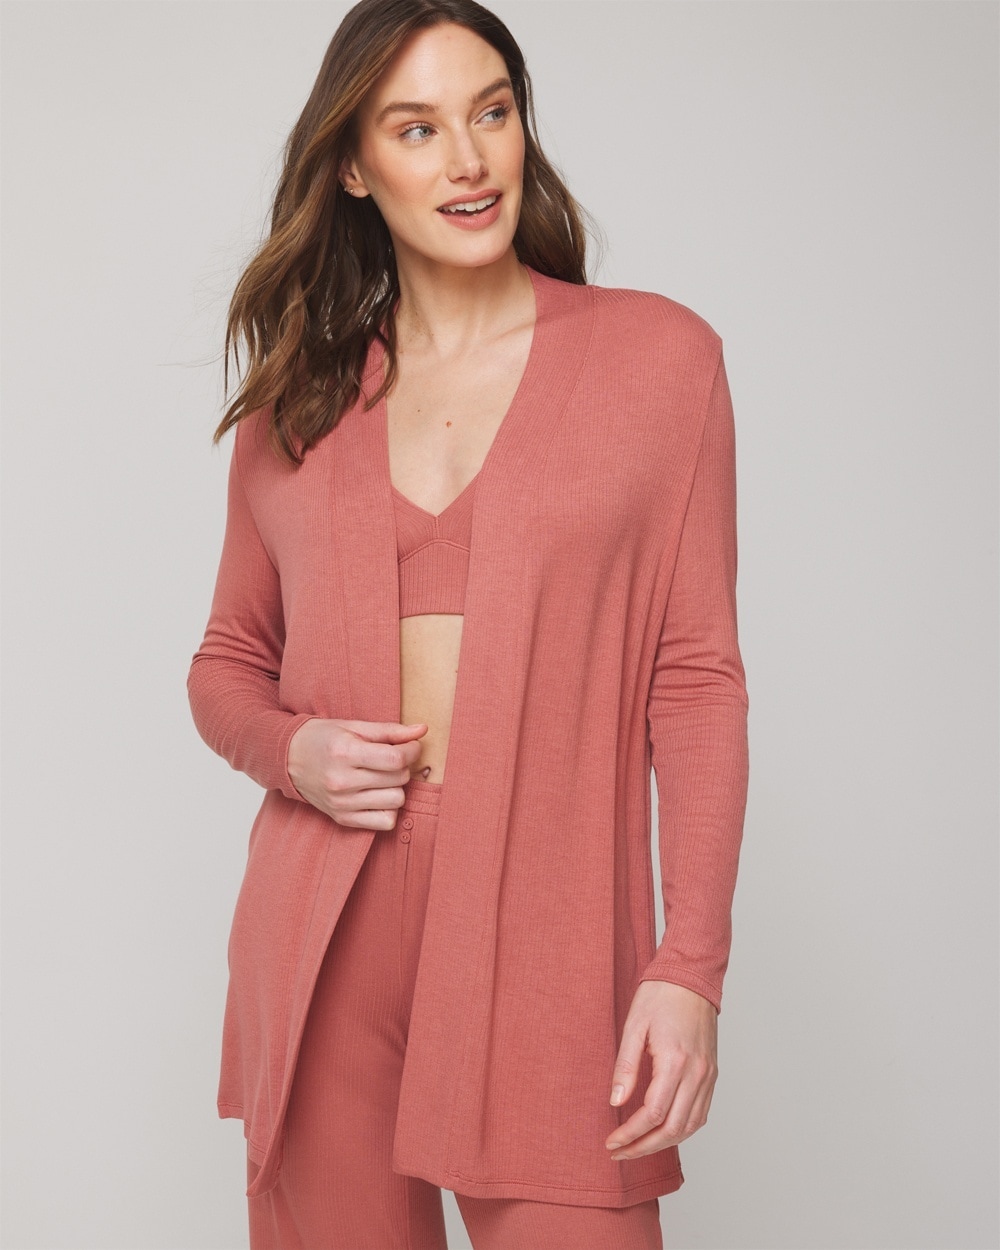 Soma Women's Lightweight Ribbed Knit Wrap In Pink Size 2xl |  In Clay Rose